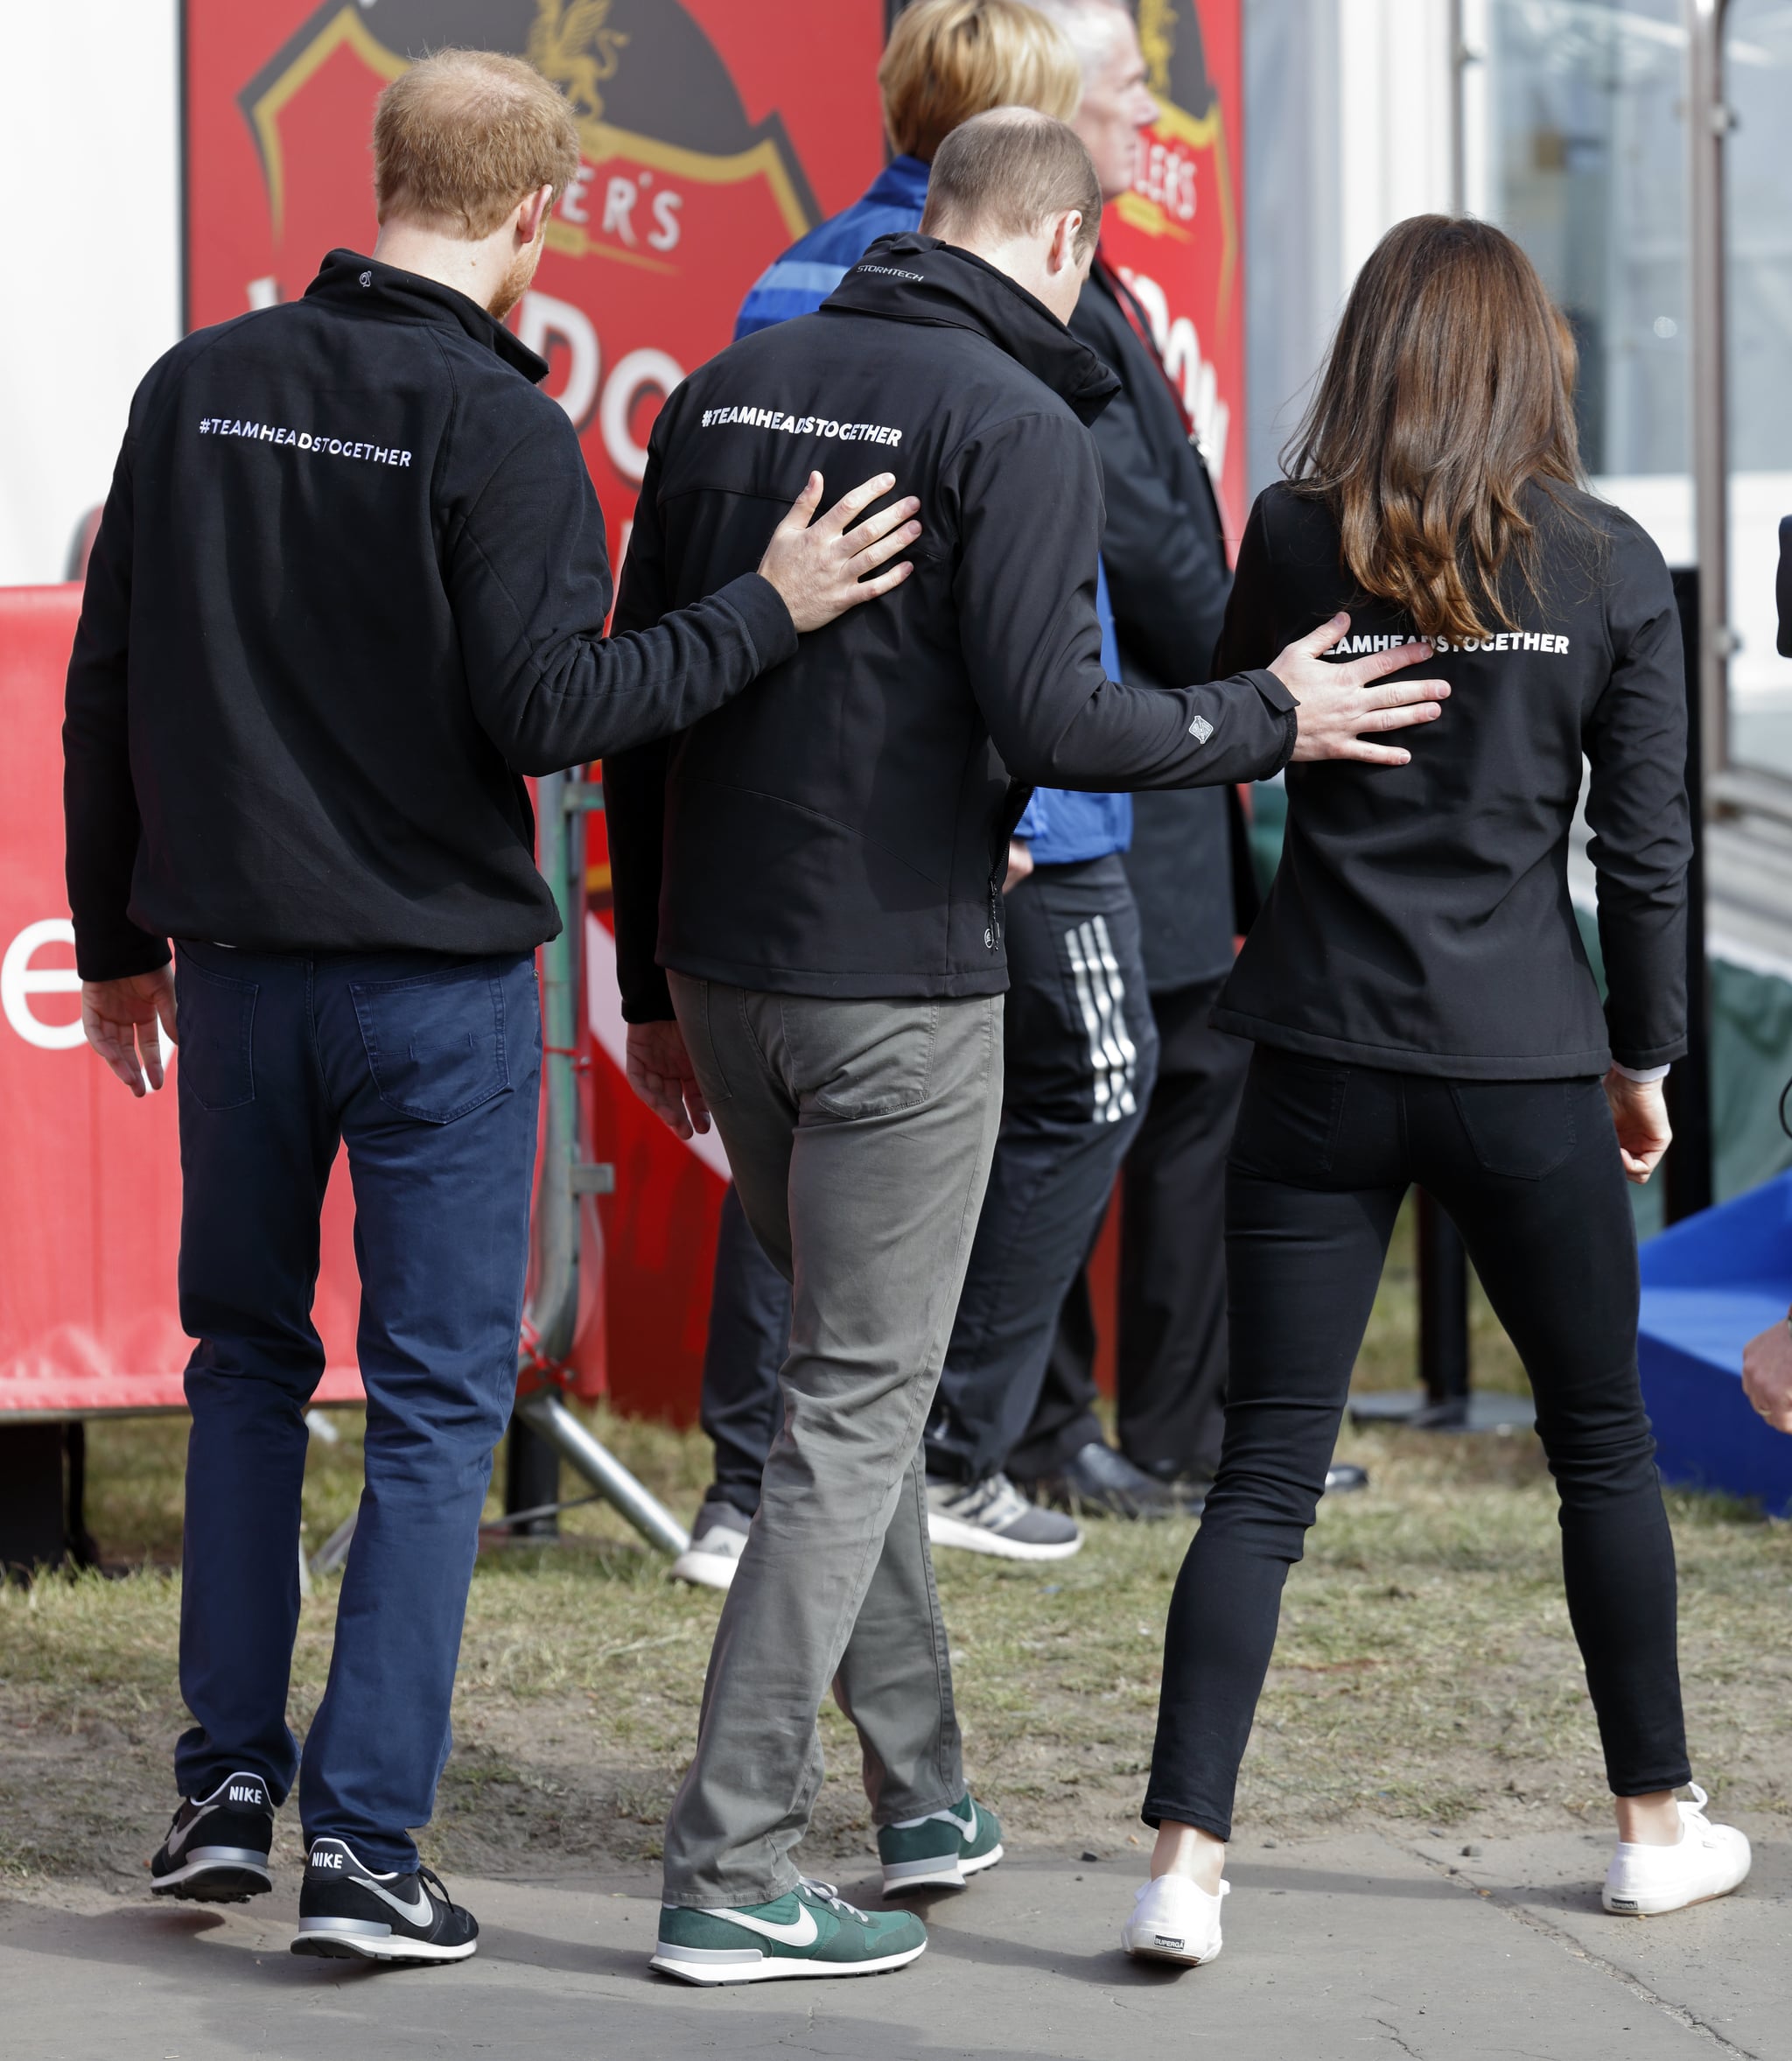 Prince-William-Touching-Kate-Middleton-Back-Pictures.jpg